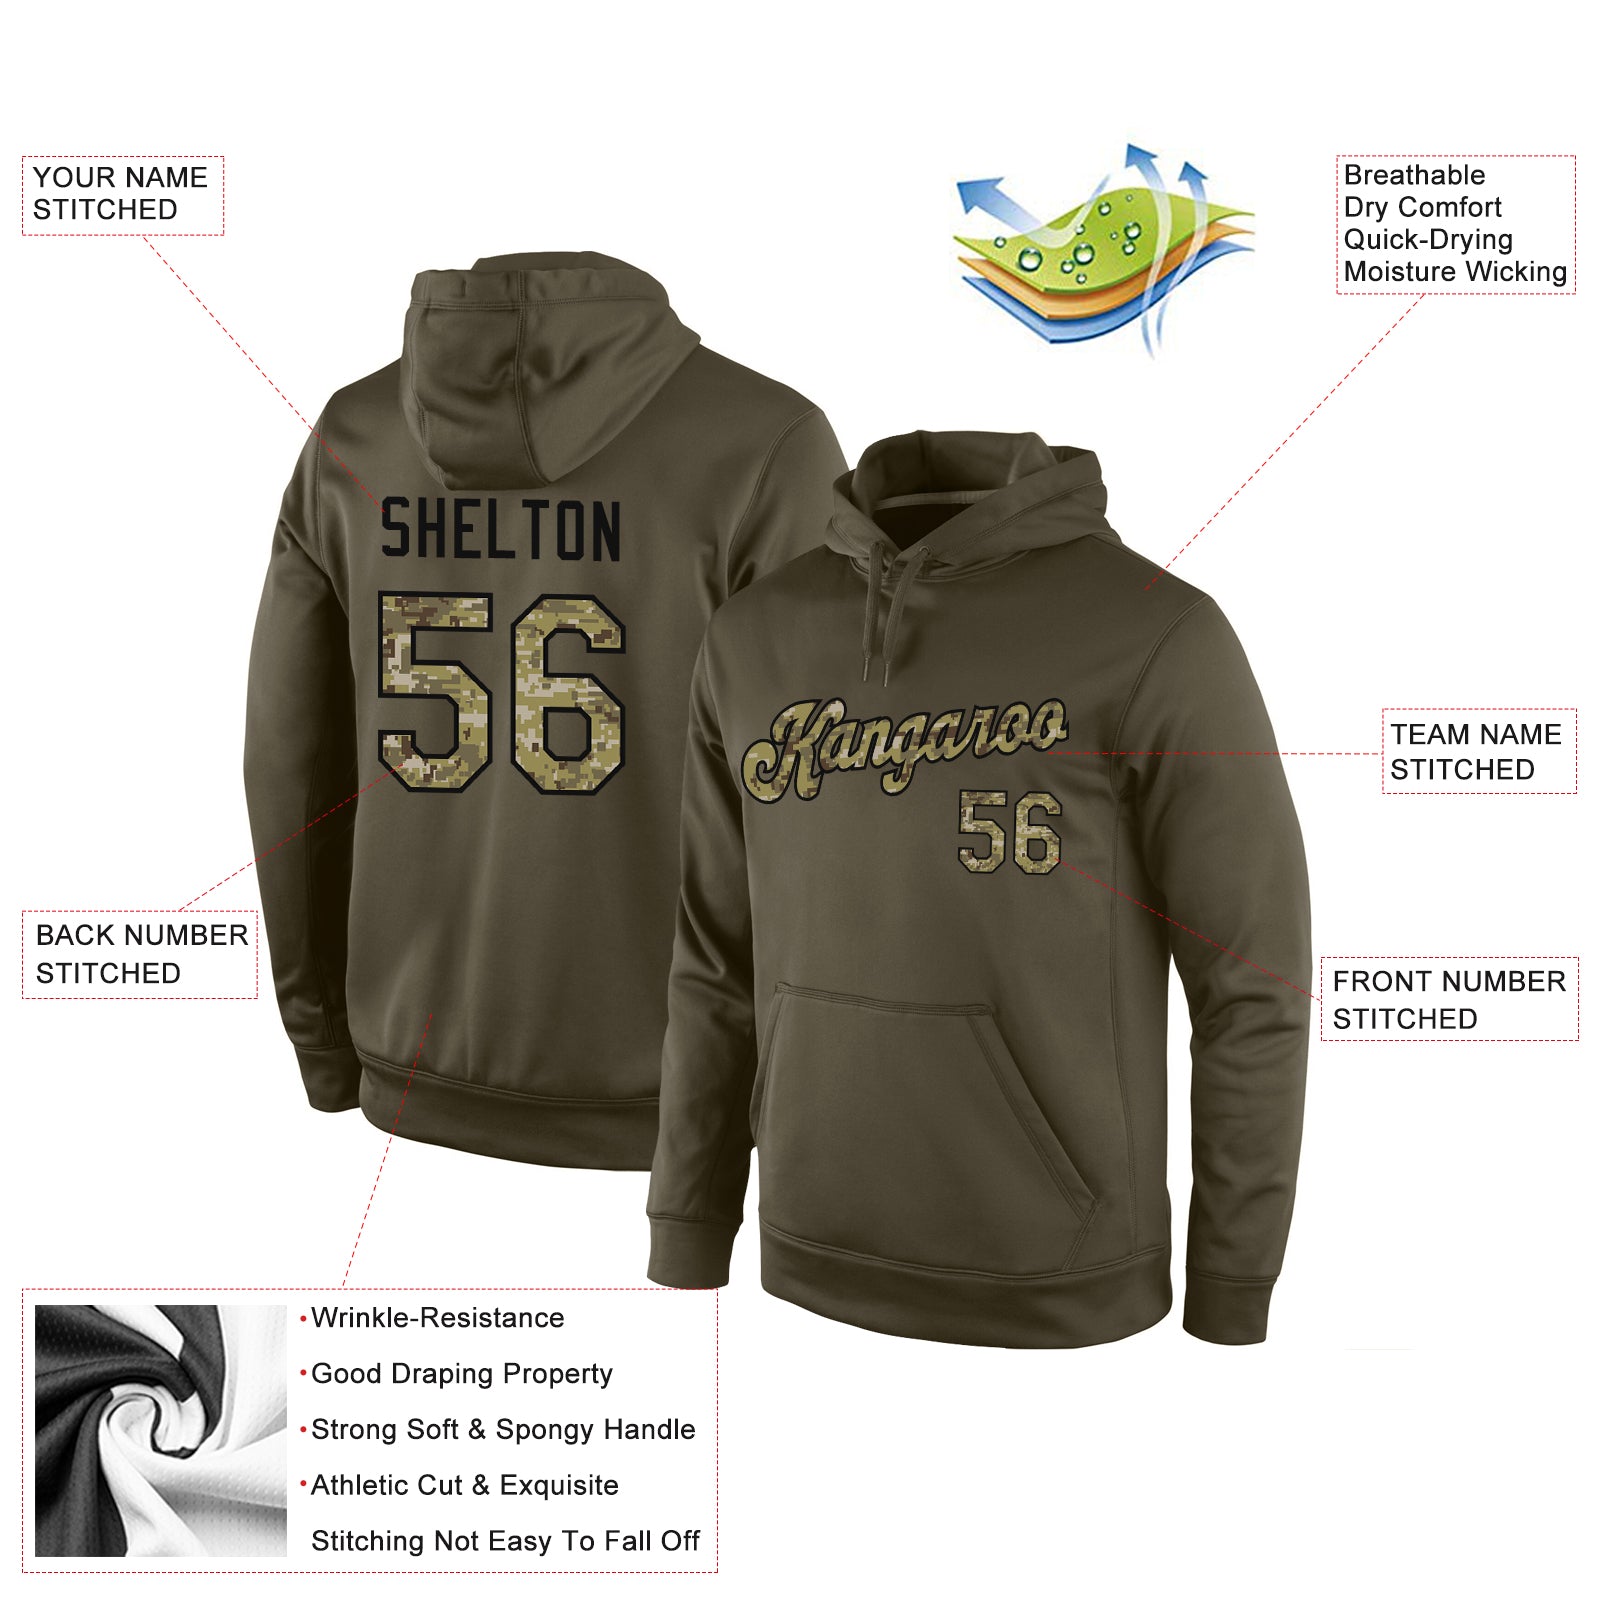 Custom Stitched Olive Camo-Black Sports Pullover Sweatshirt Salute To Service Hoodie